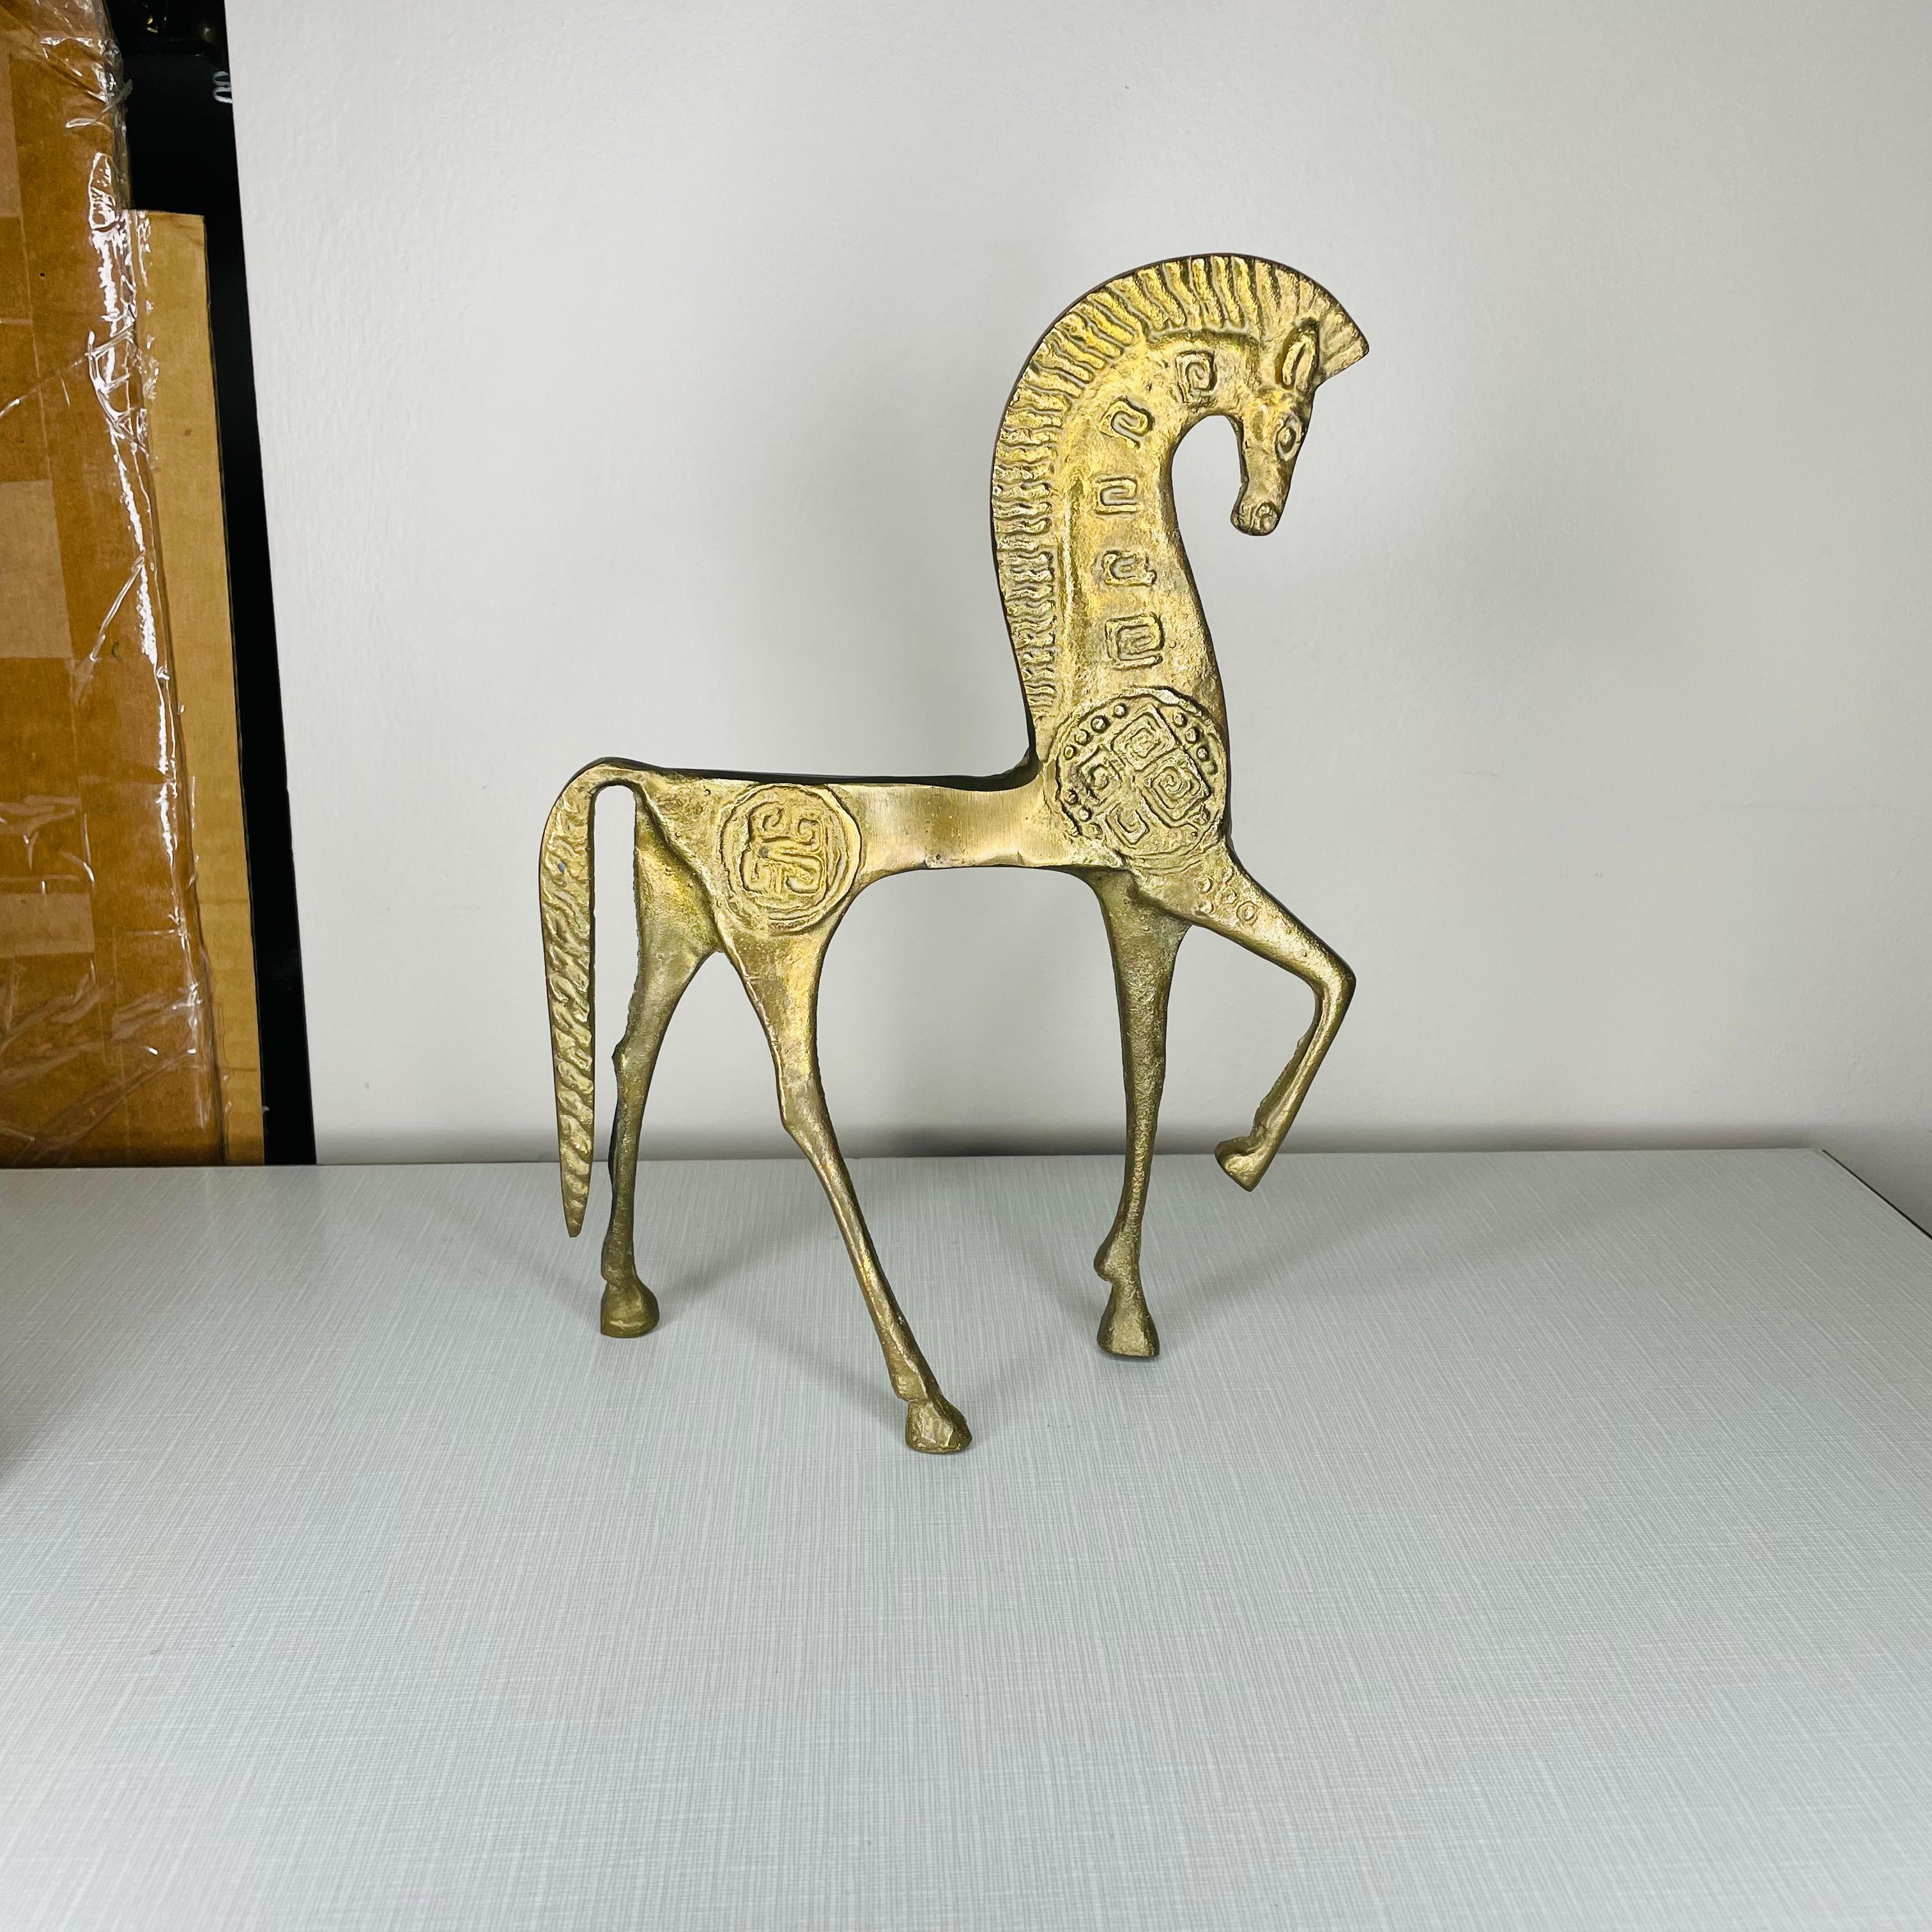 Swedish brass horse figure in excellent condition. Mid-Century Modern. Would look great on a bookshelf!